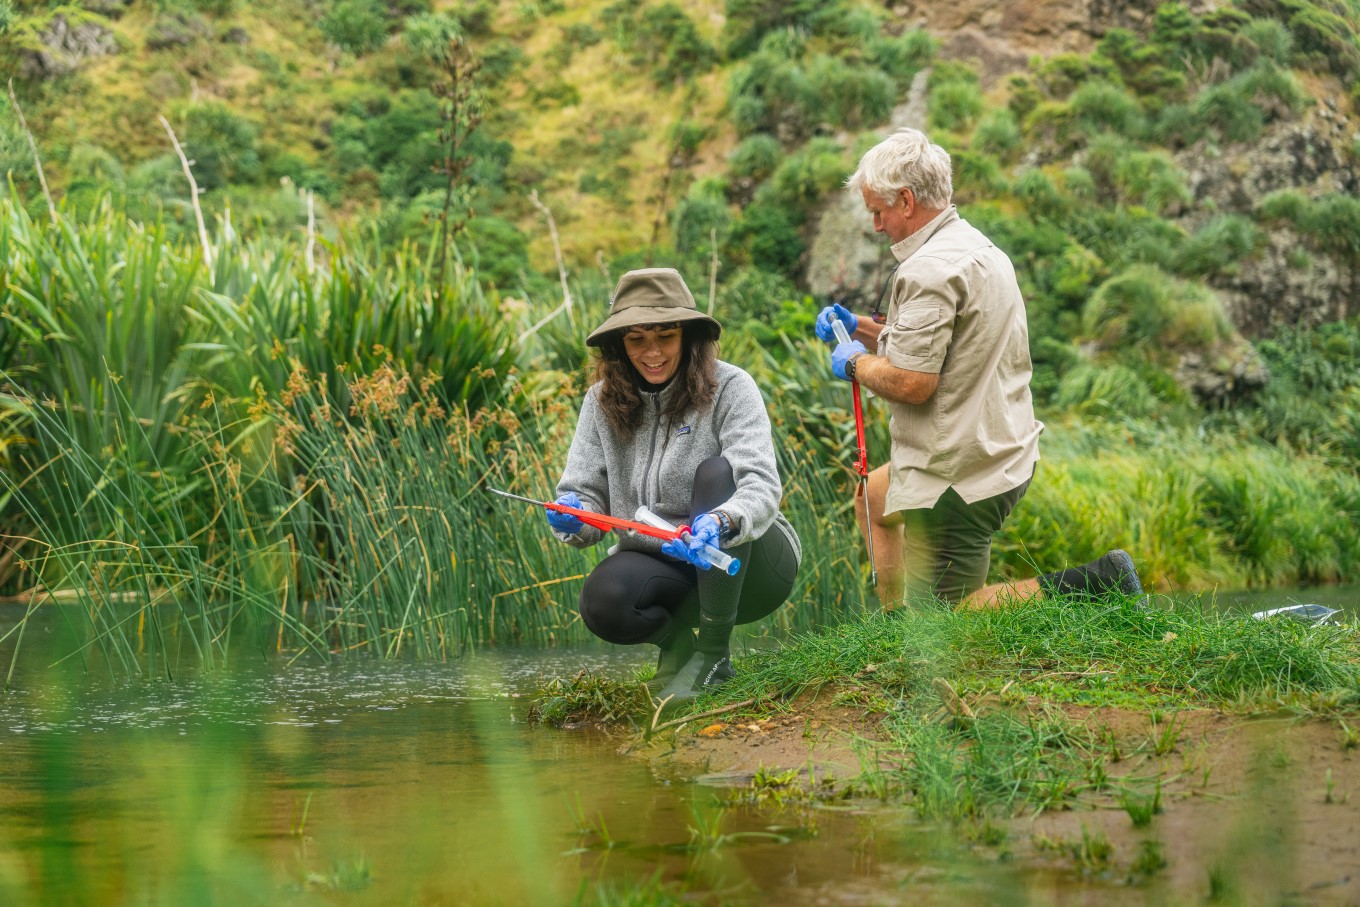 Auckland Council freshwater ecologists Rose Gregersen and Matthew Boxham have been taking eDNA (environmental DNA) freshwater samples at Pararaha Valley, near Karekare, which is classed as one of the region's most outstanding wetlands.